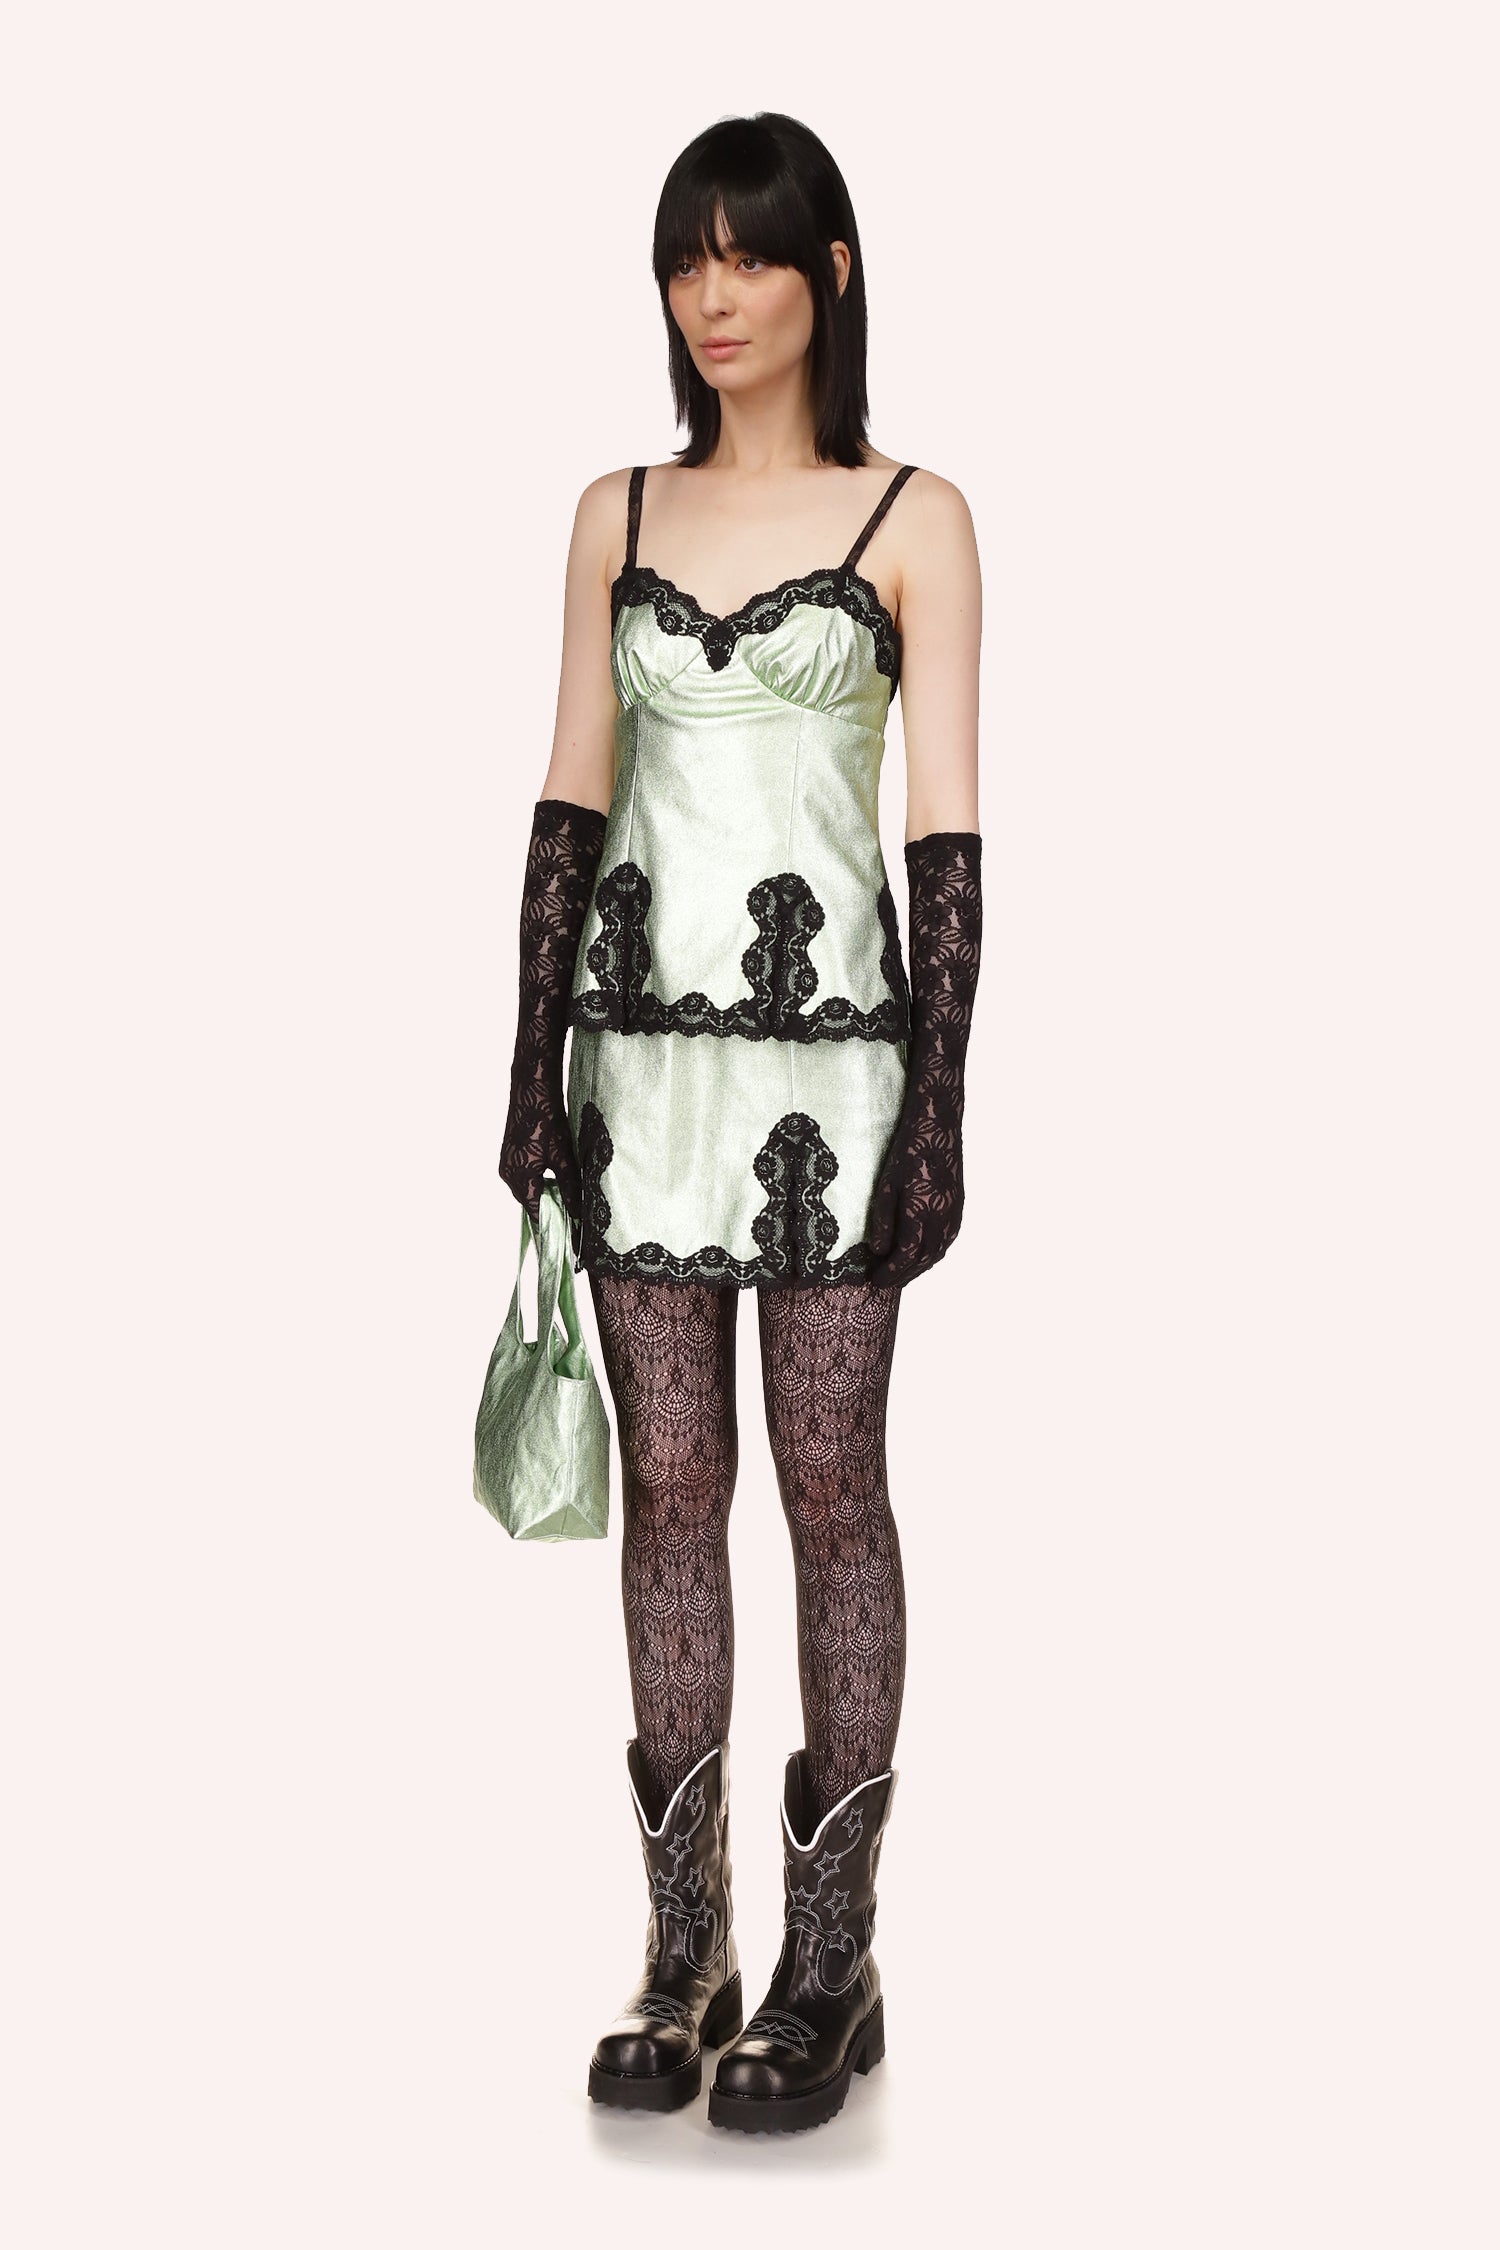 The stunning floral laced pattern elbow-length gloves adds glamour to any outfit